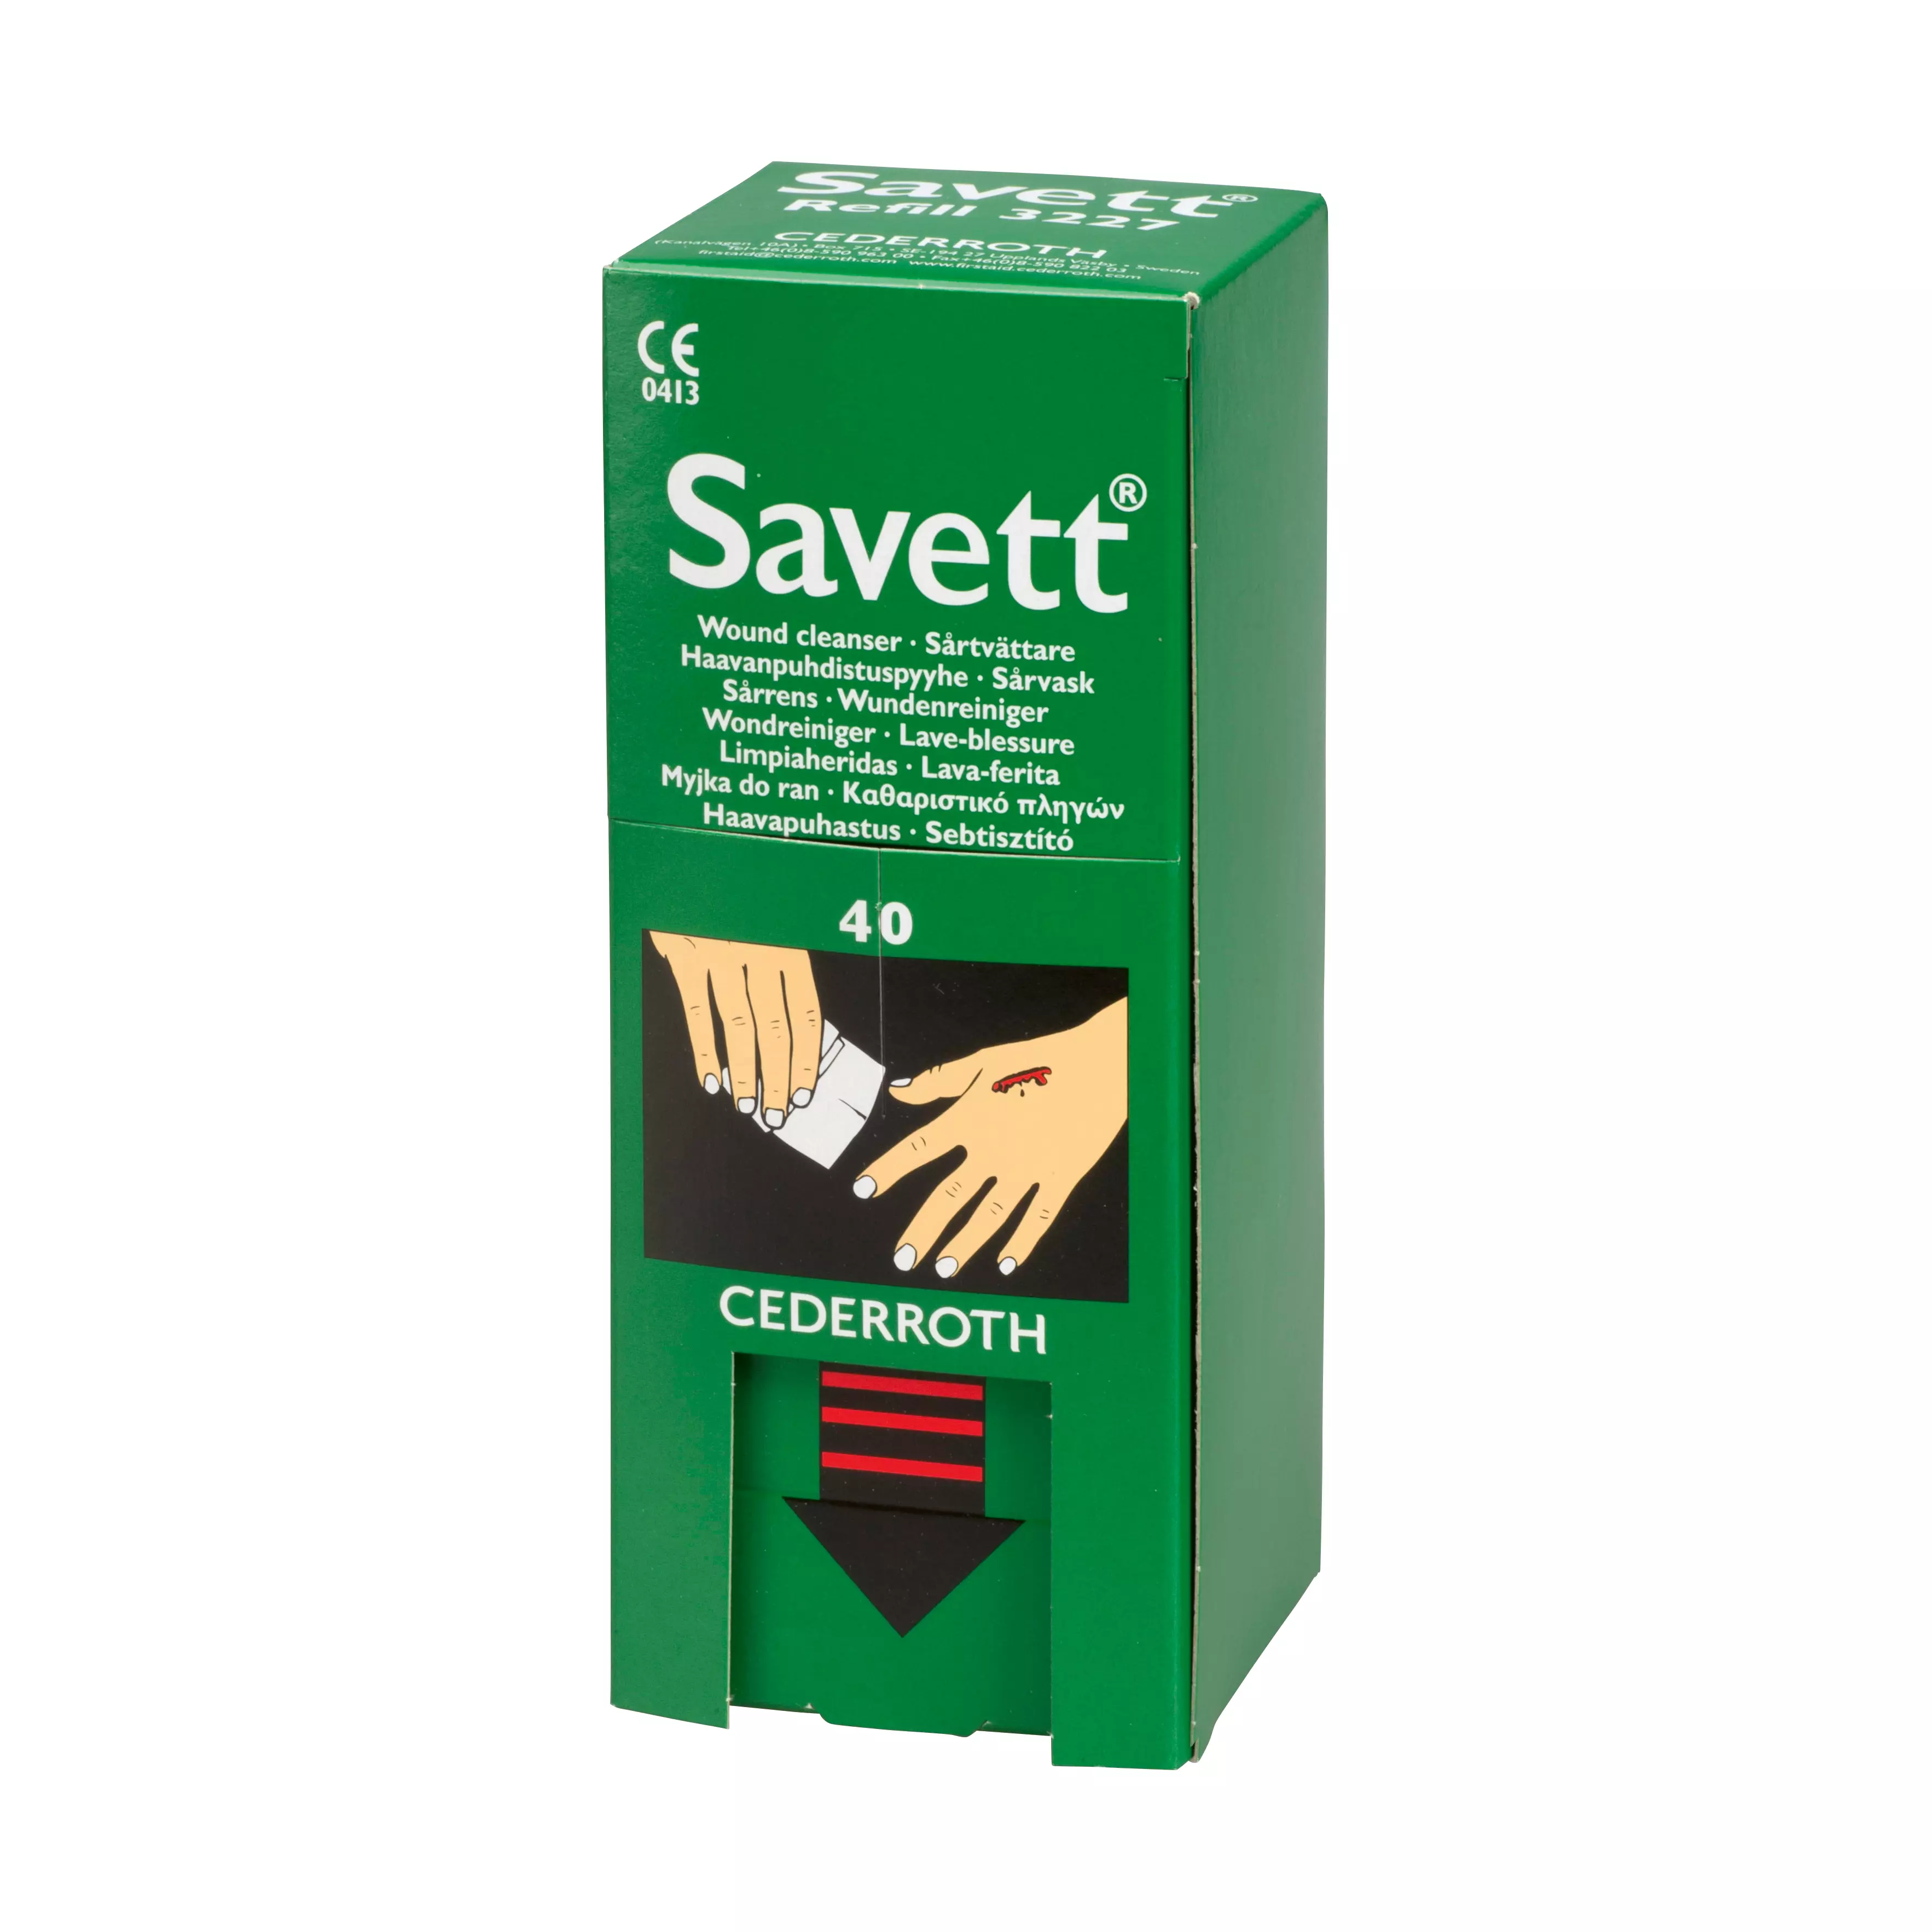 Savett® wound cleansing wipes